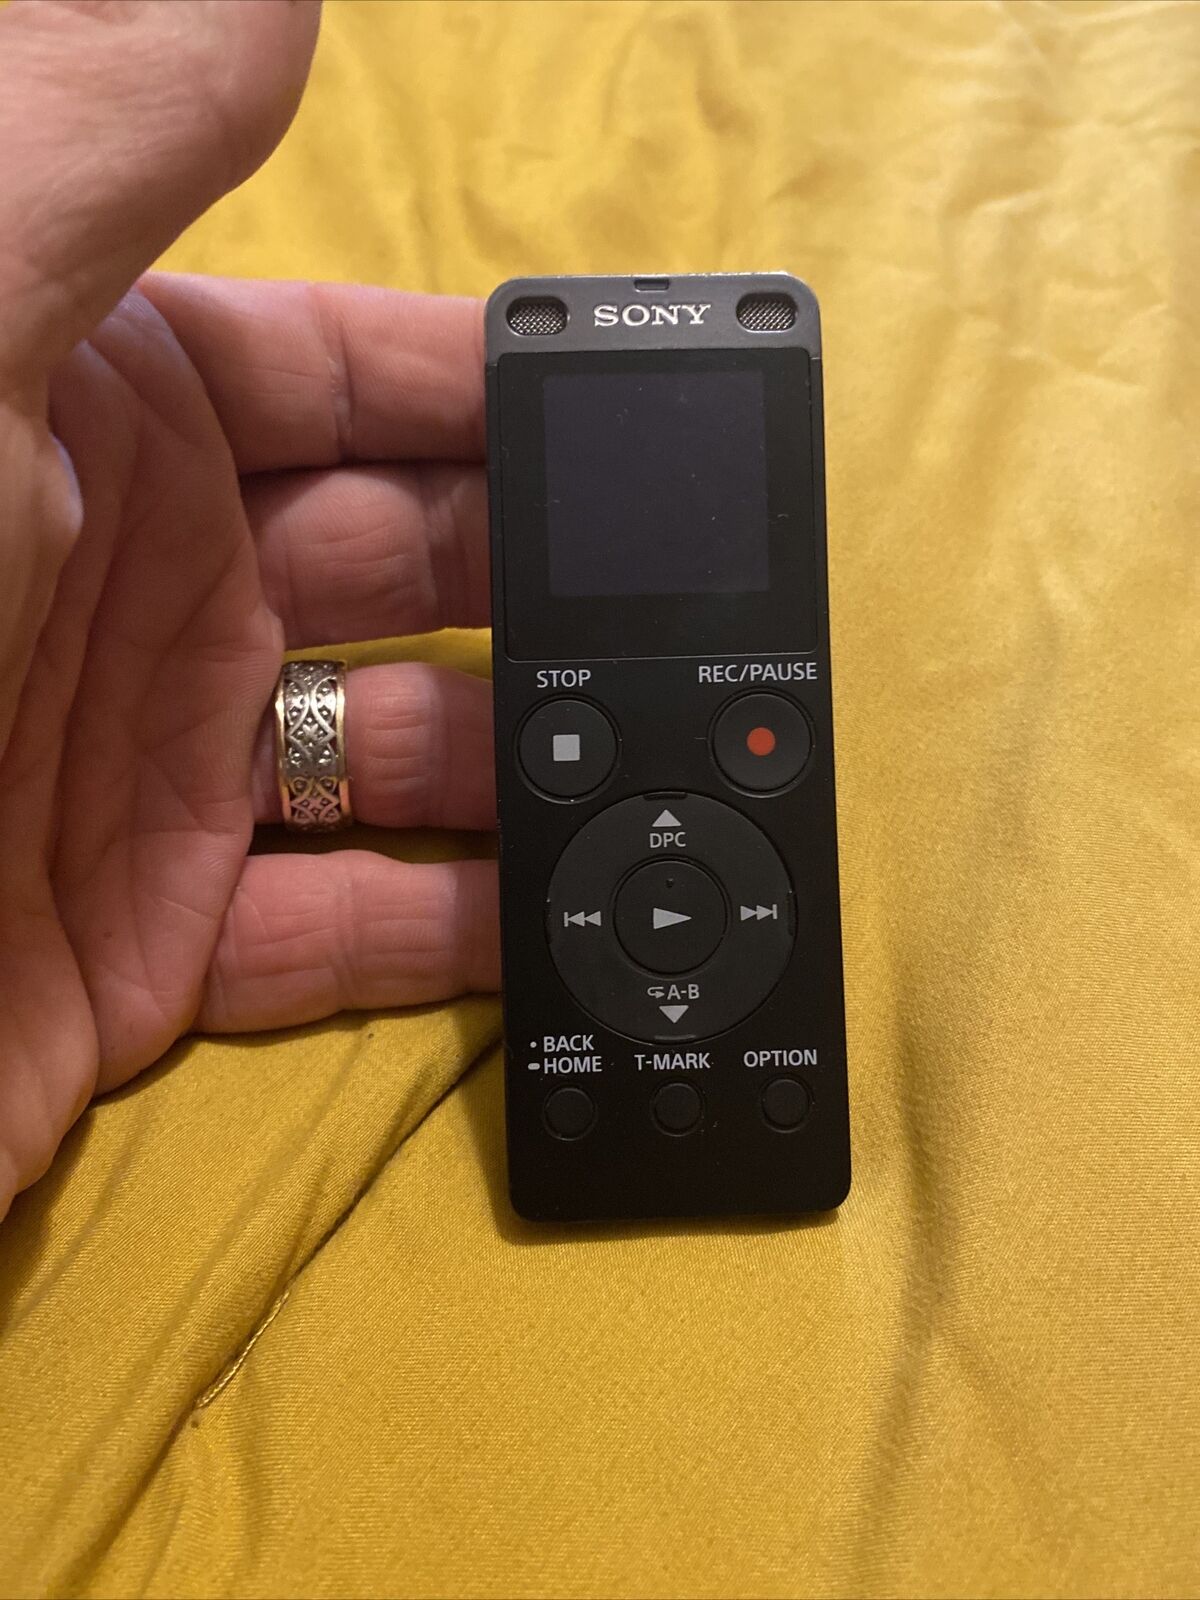 Sony ICD-UX560 4GB Digital Voice Recorder | Black - TESTED